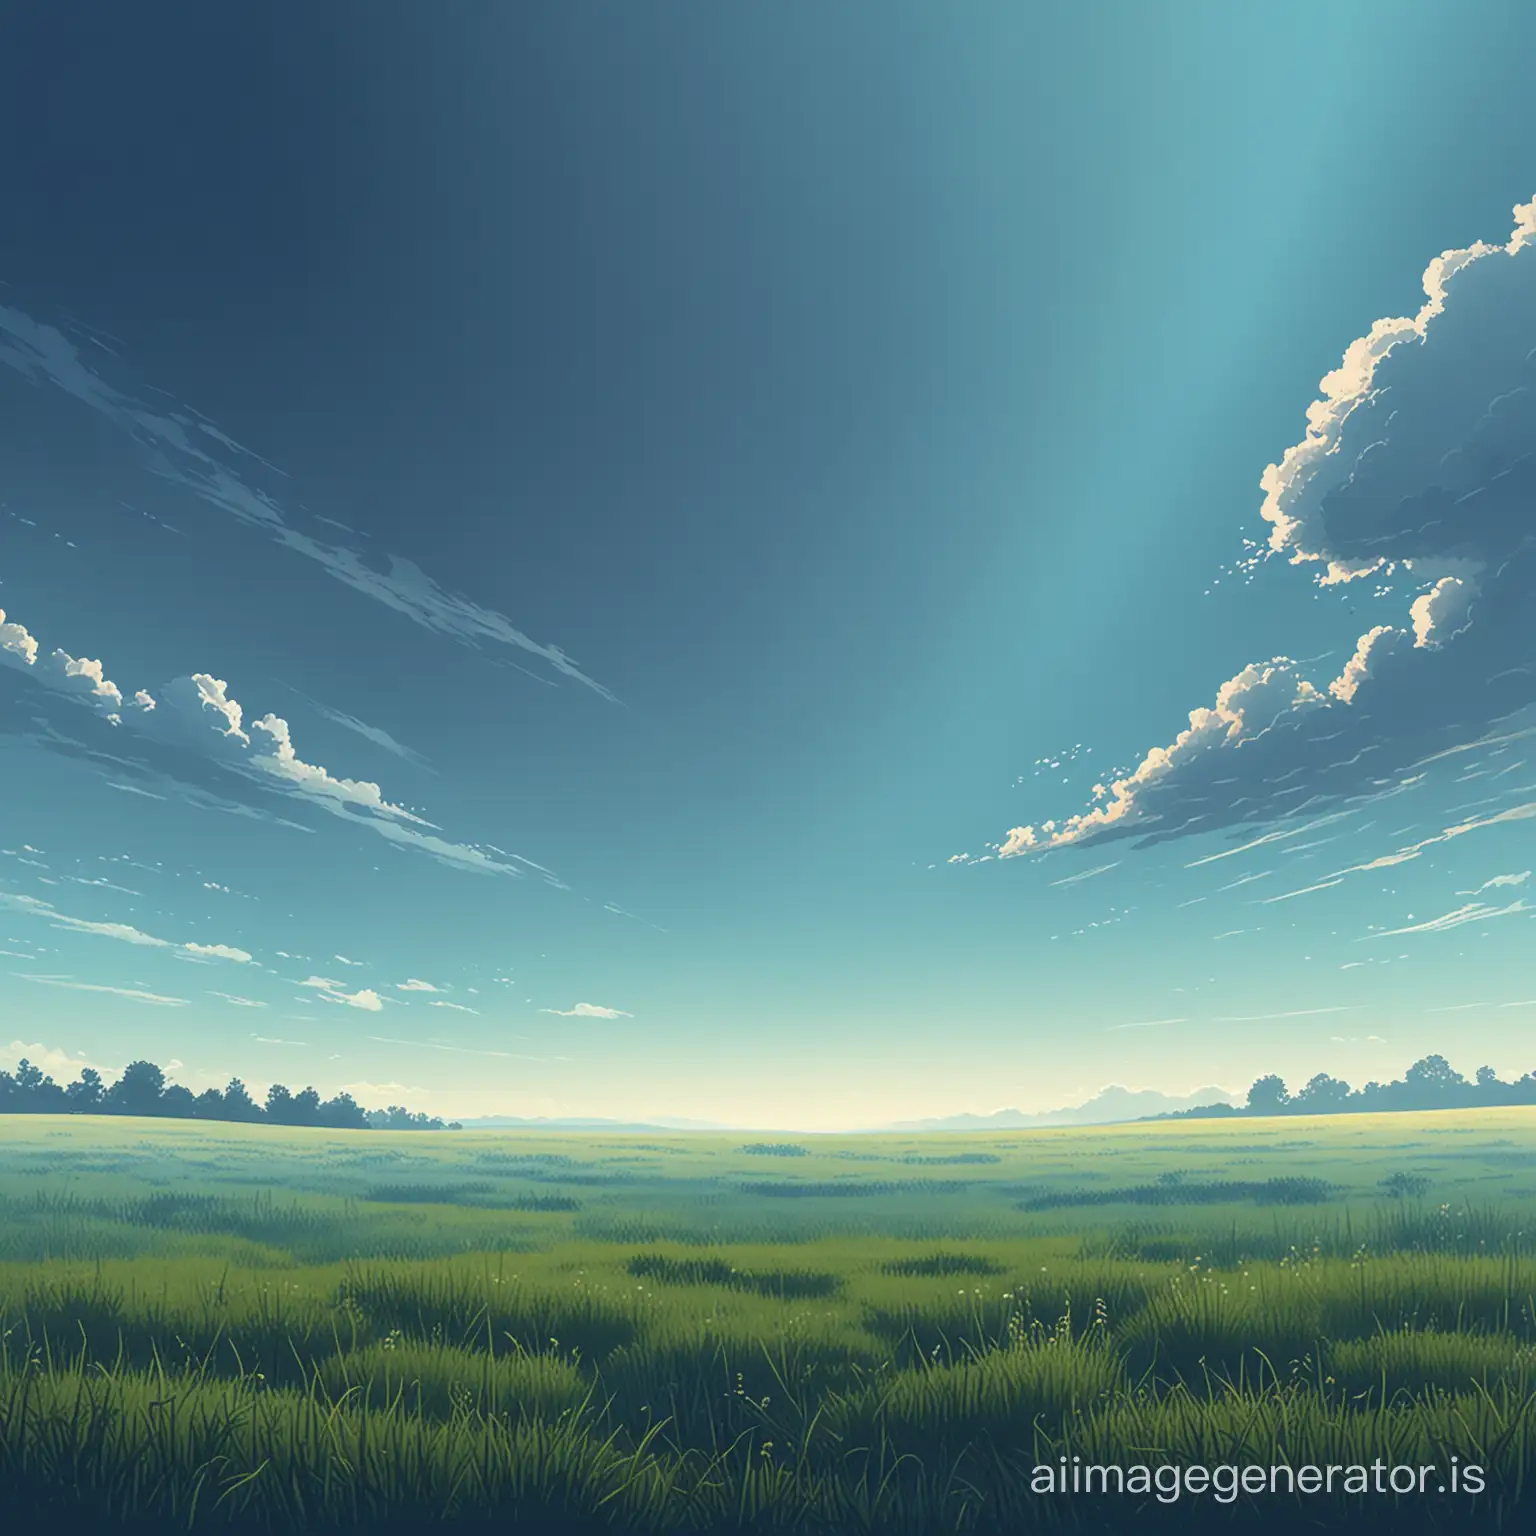 Illustration-of-Meadow-Under-Blue-Sky-Gradient-with-Distant-Clouds